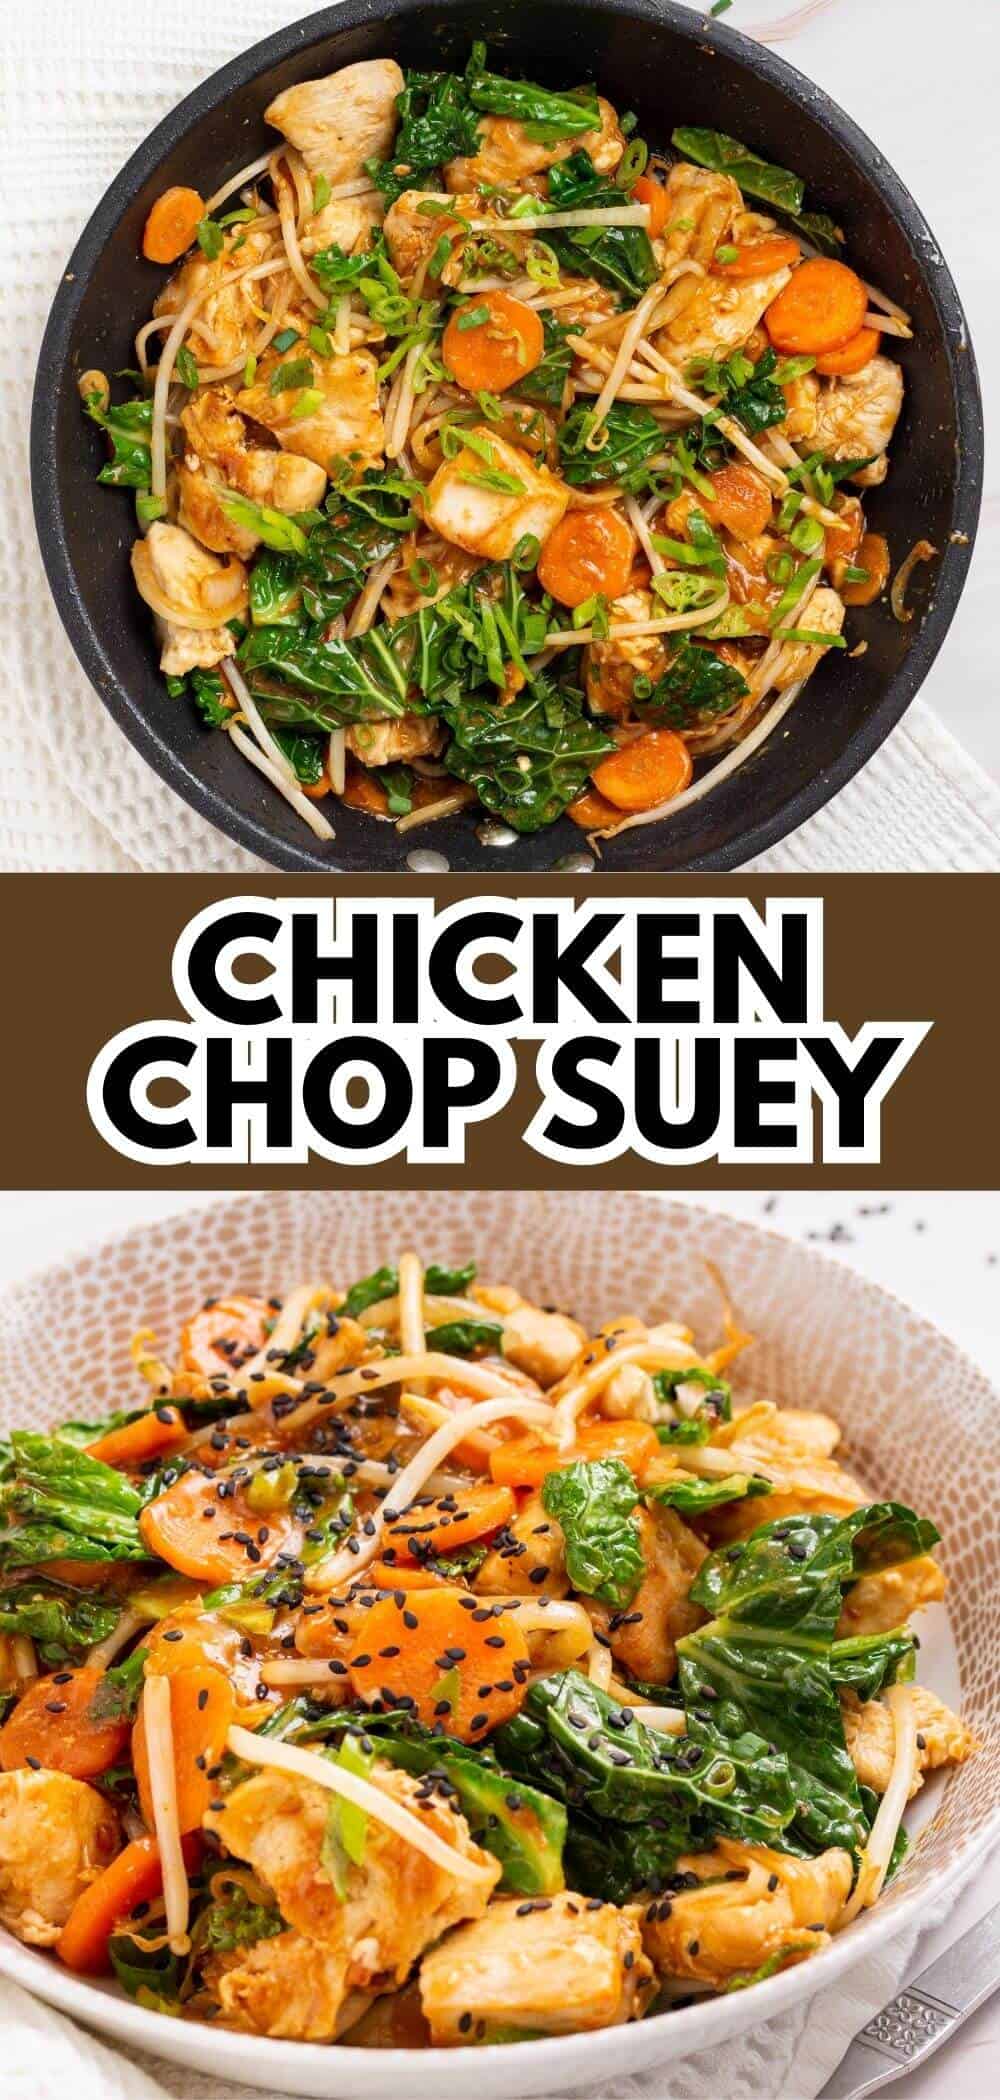 Chicken chop suey images with text.